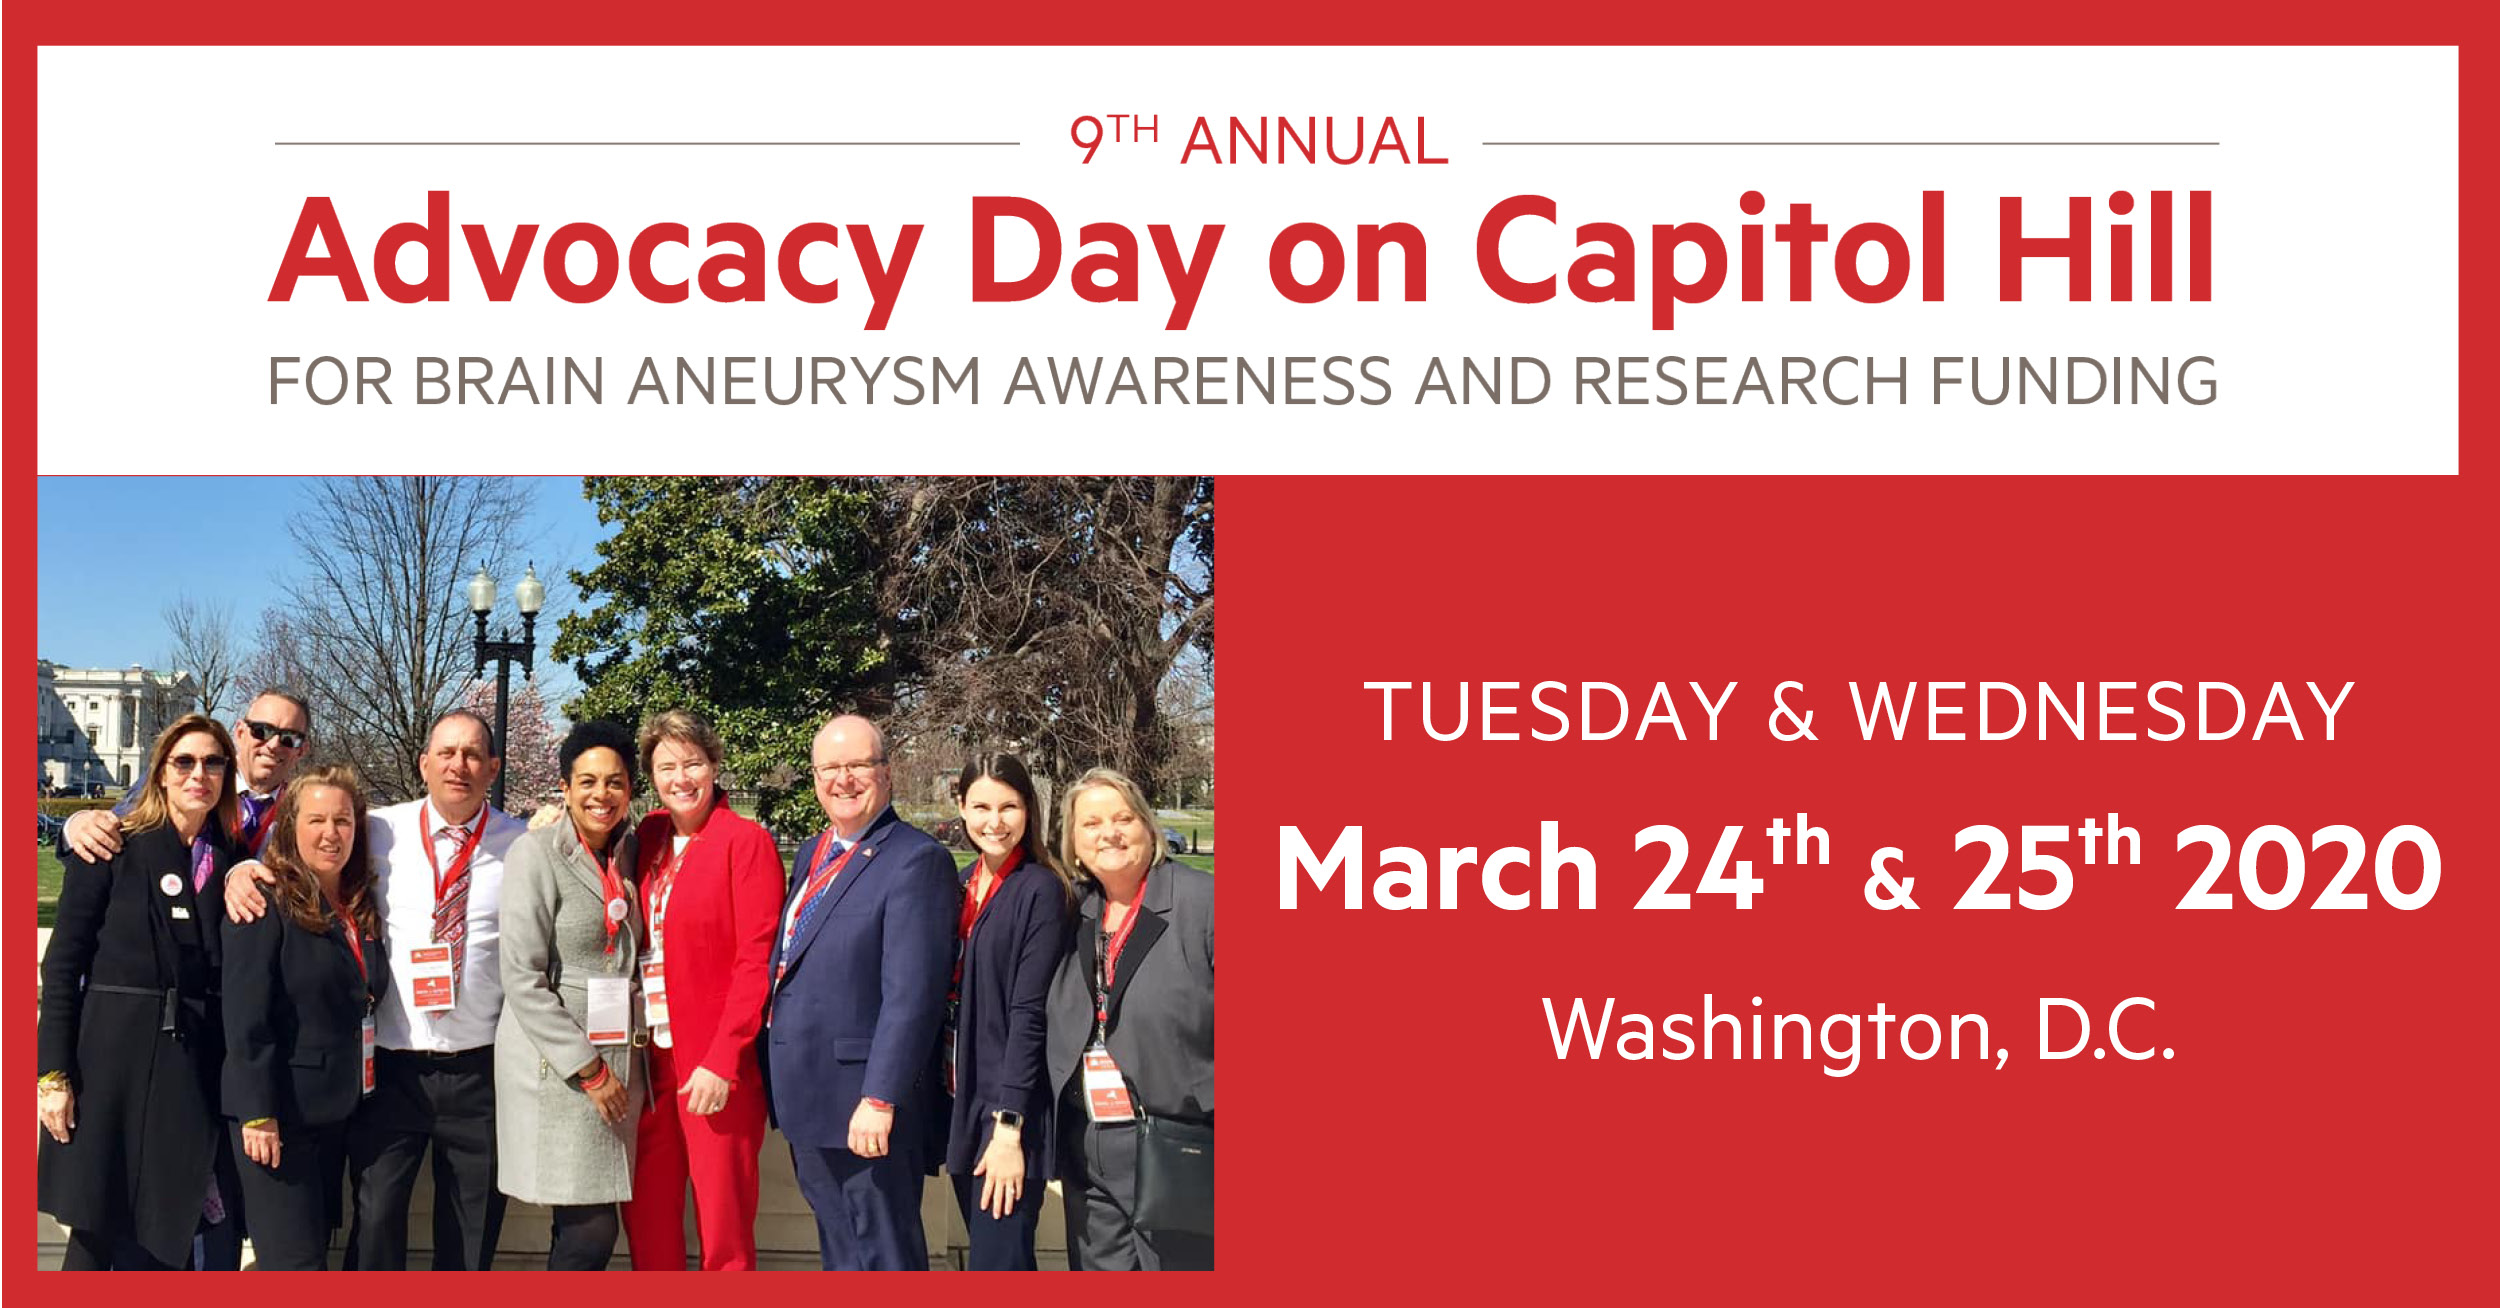 Advocacy Day_Event image_20_R2.jpg